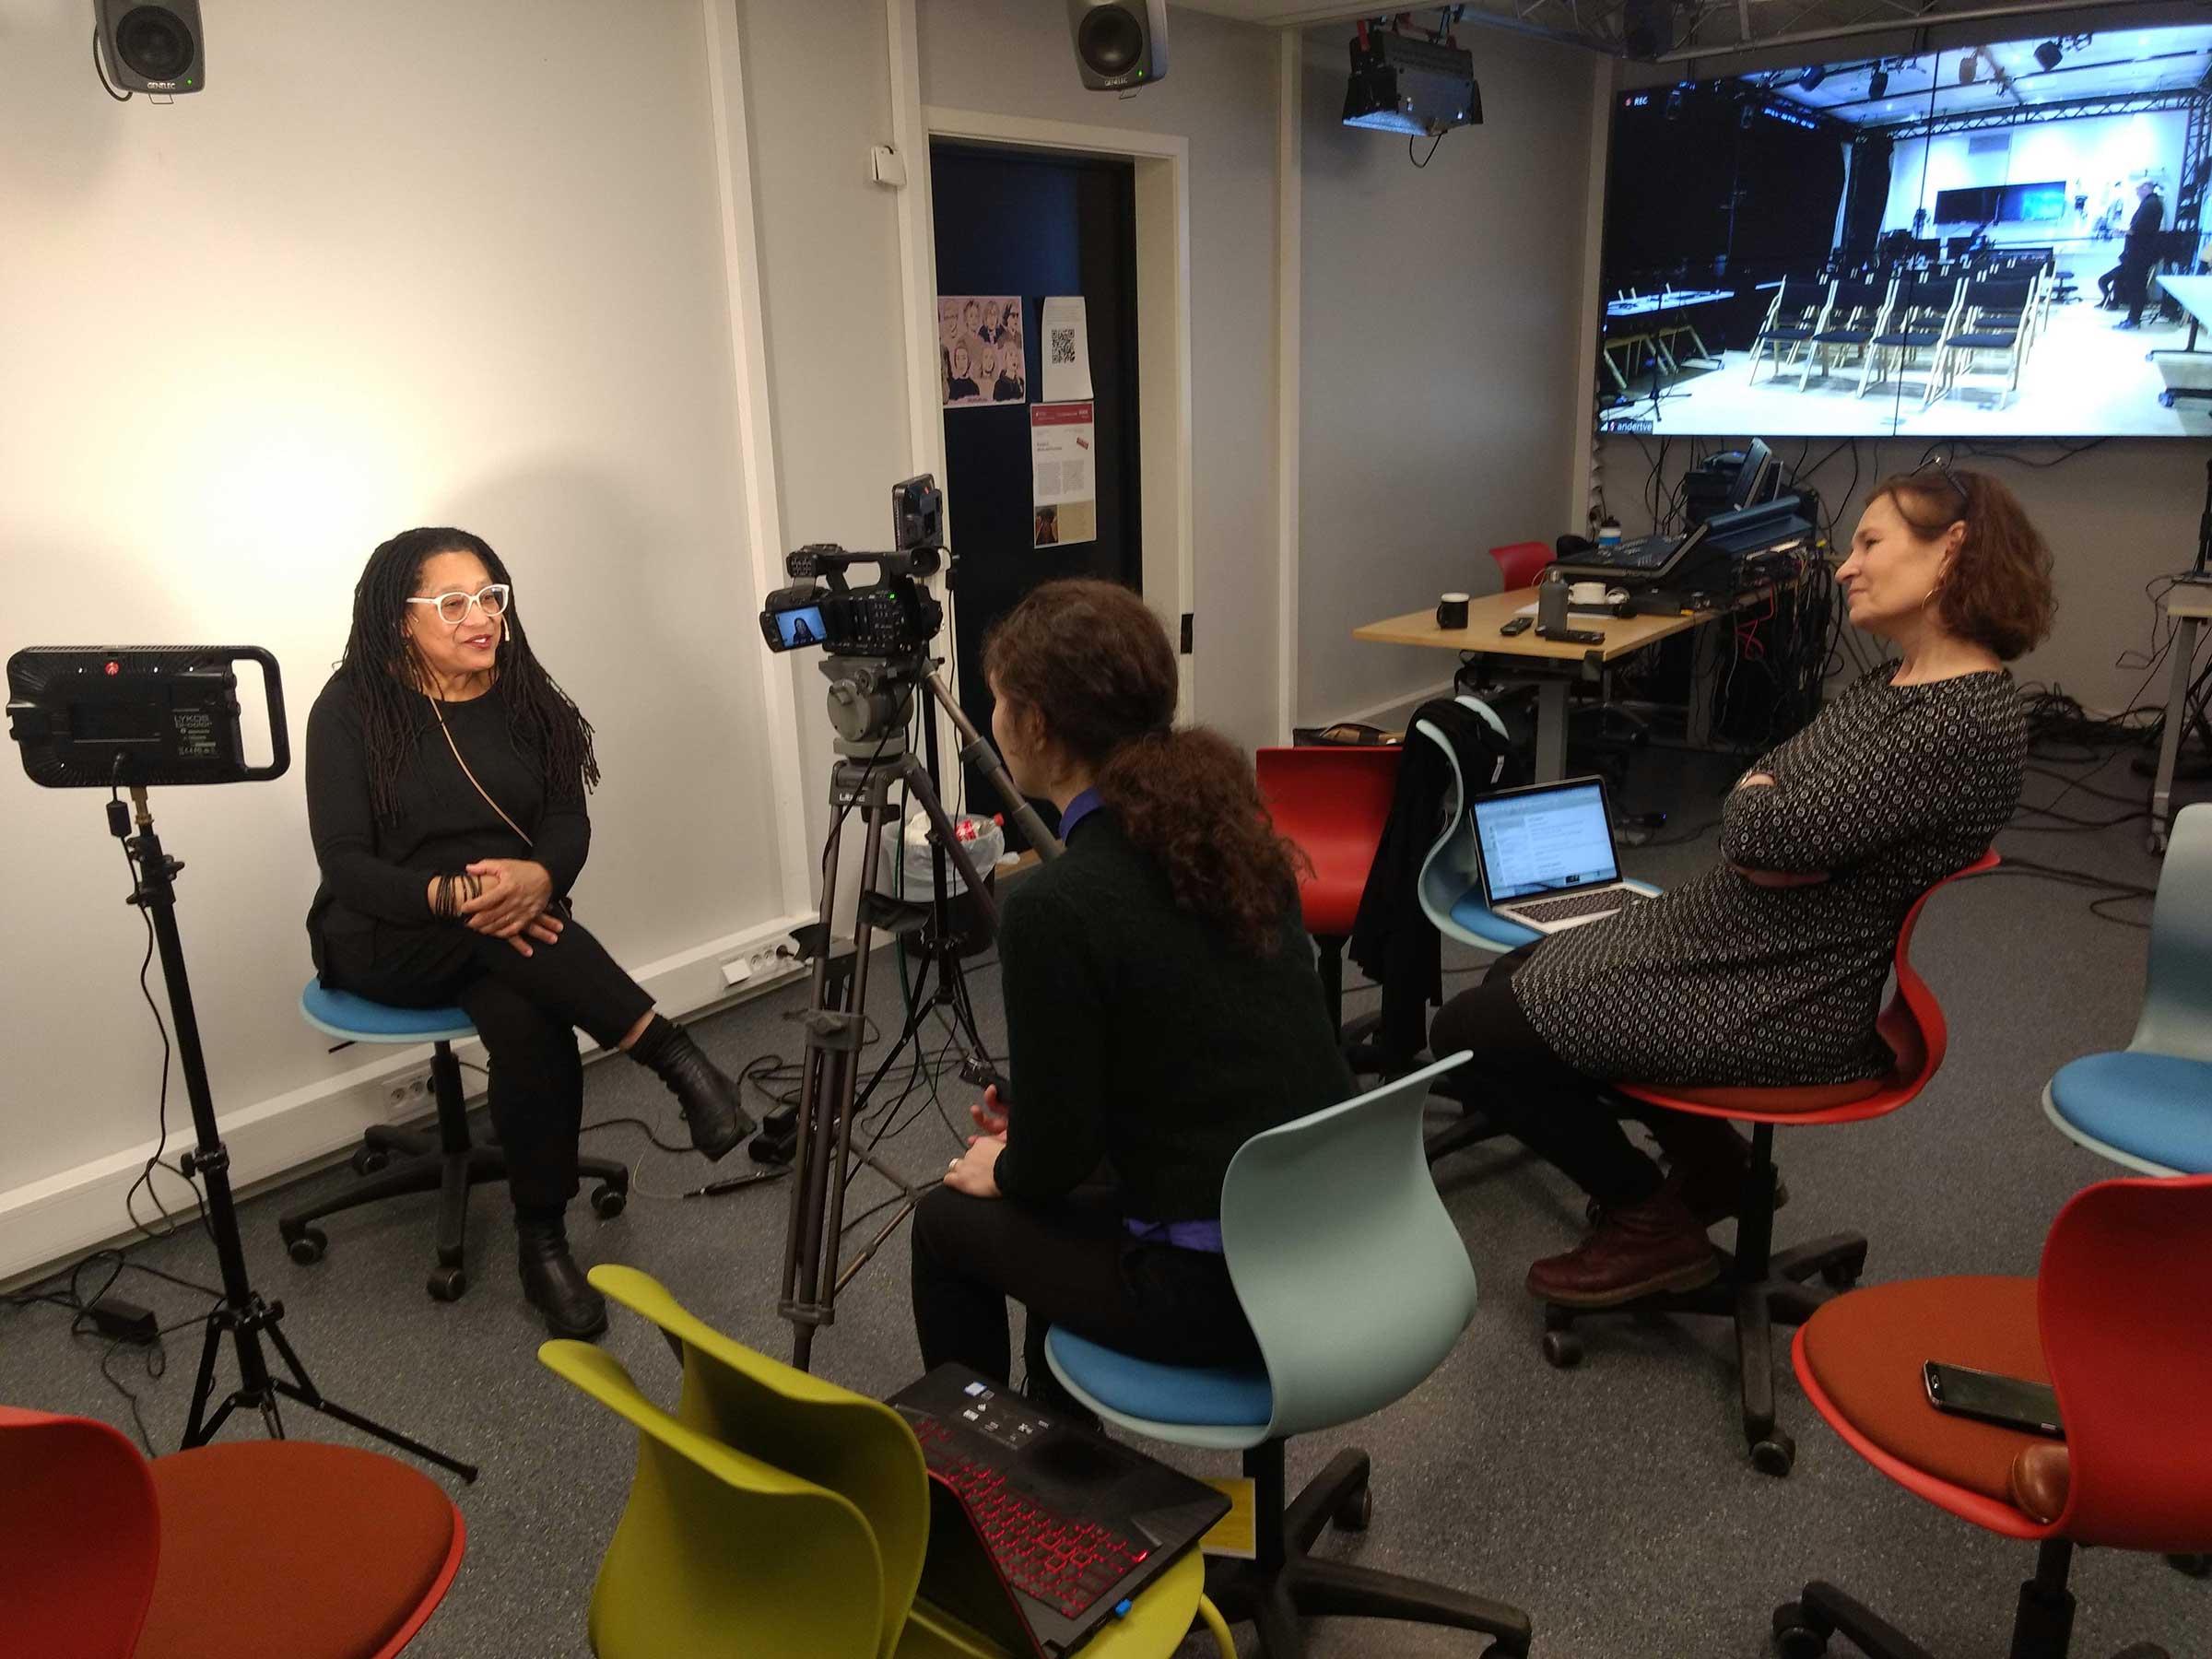 From left to right: Pamela Z, Karolina Jawad and Tone Åse during the interview. Photo by Anna Xambó.